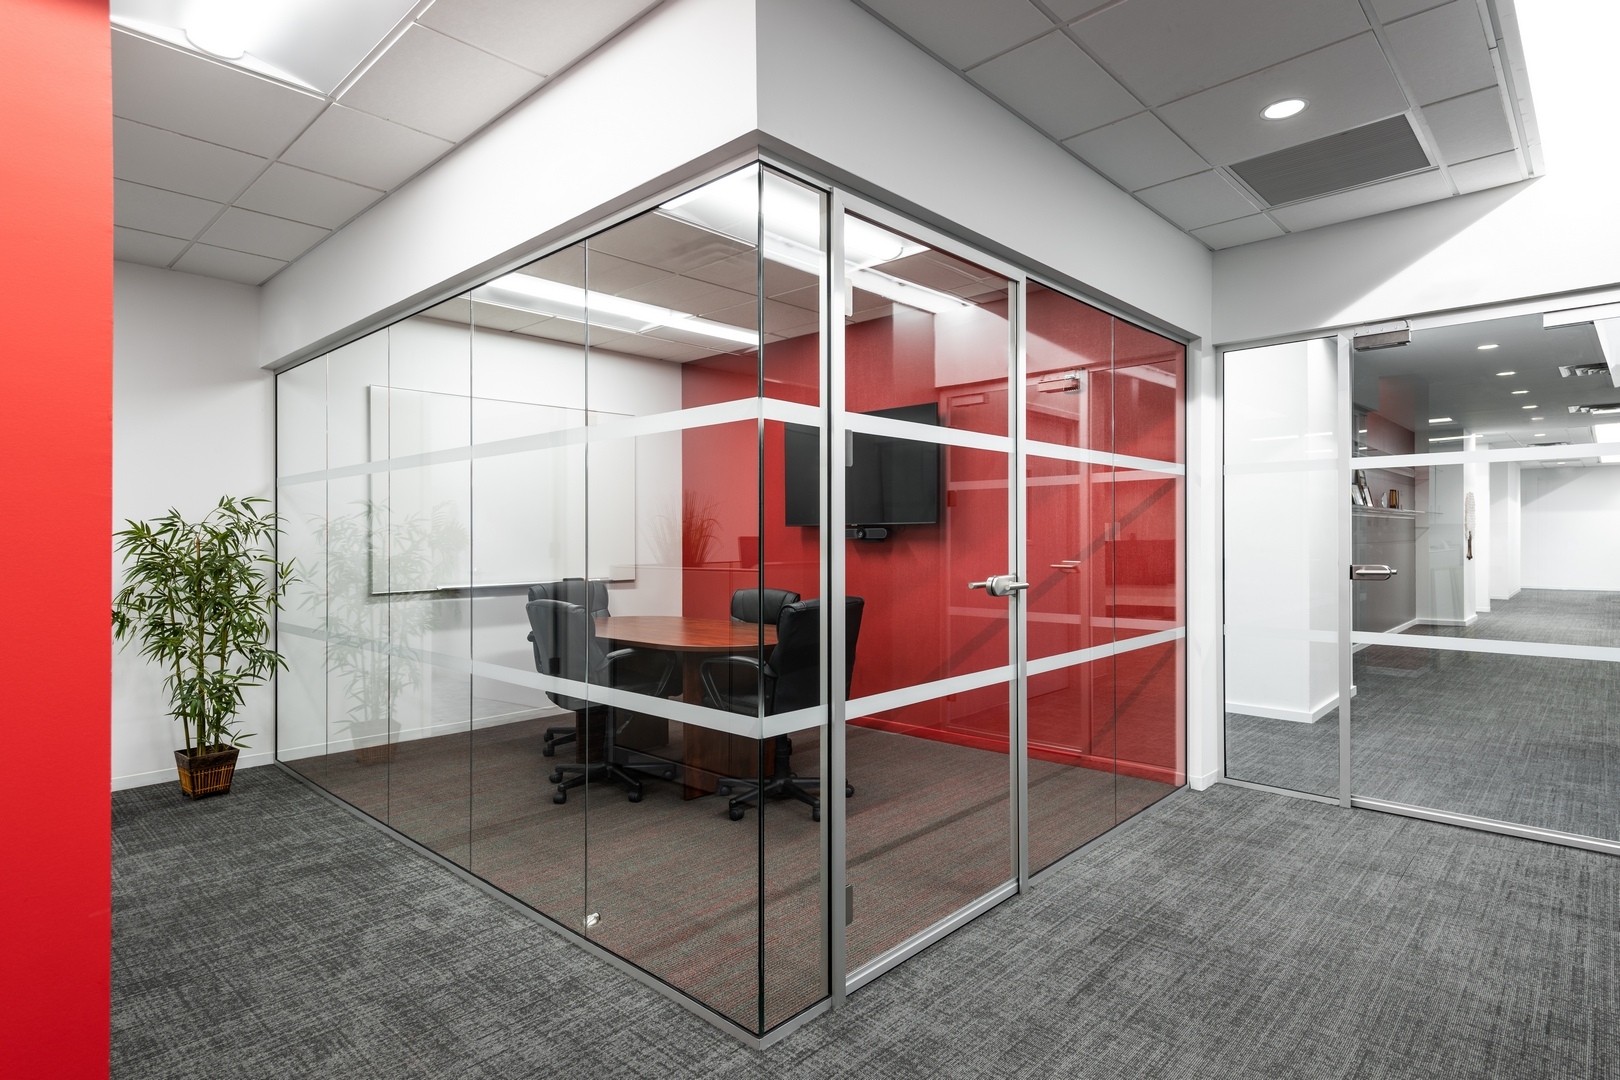 Single glass partition wall with tempered glass door